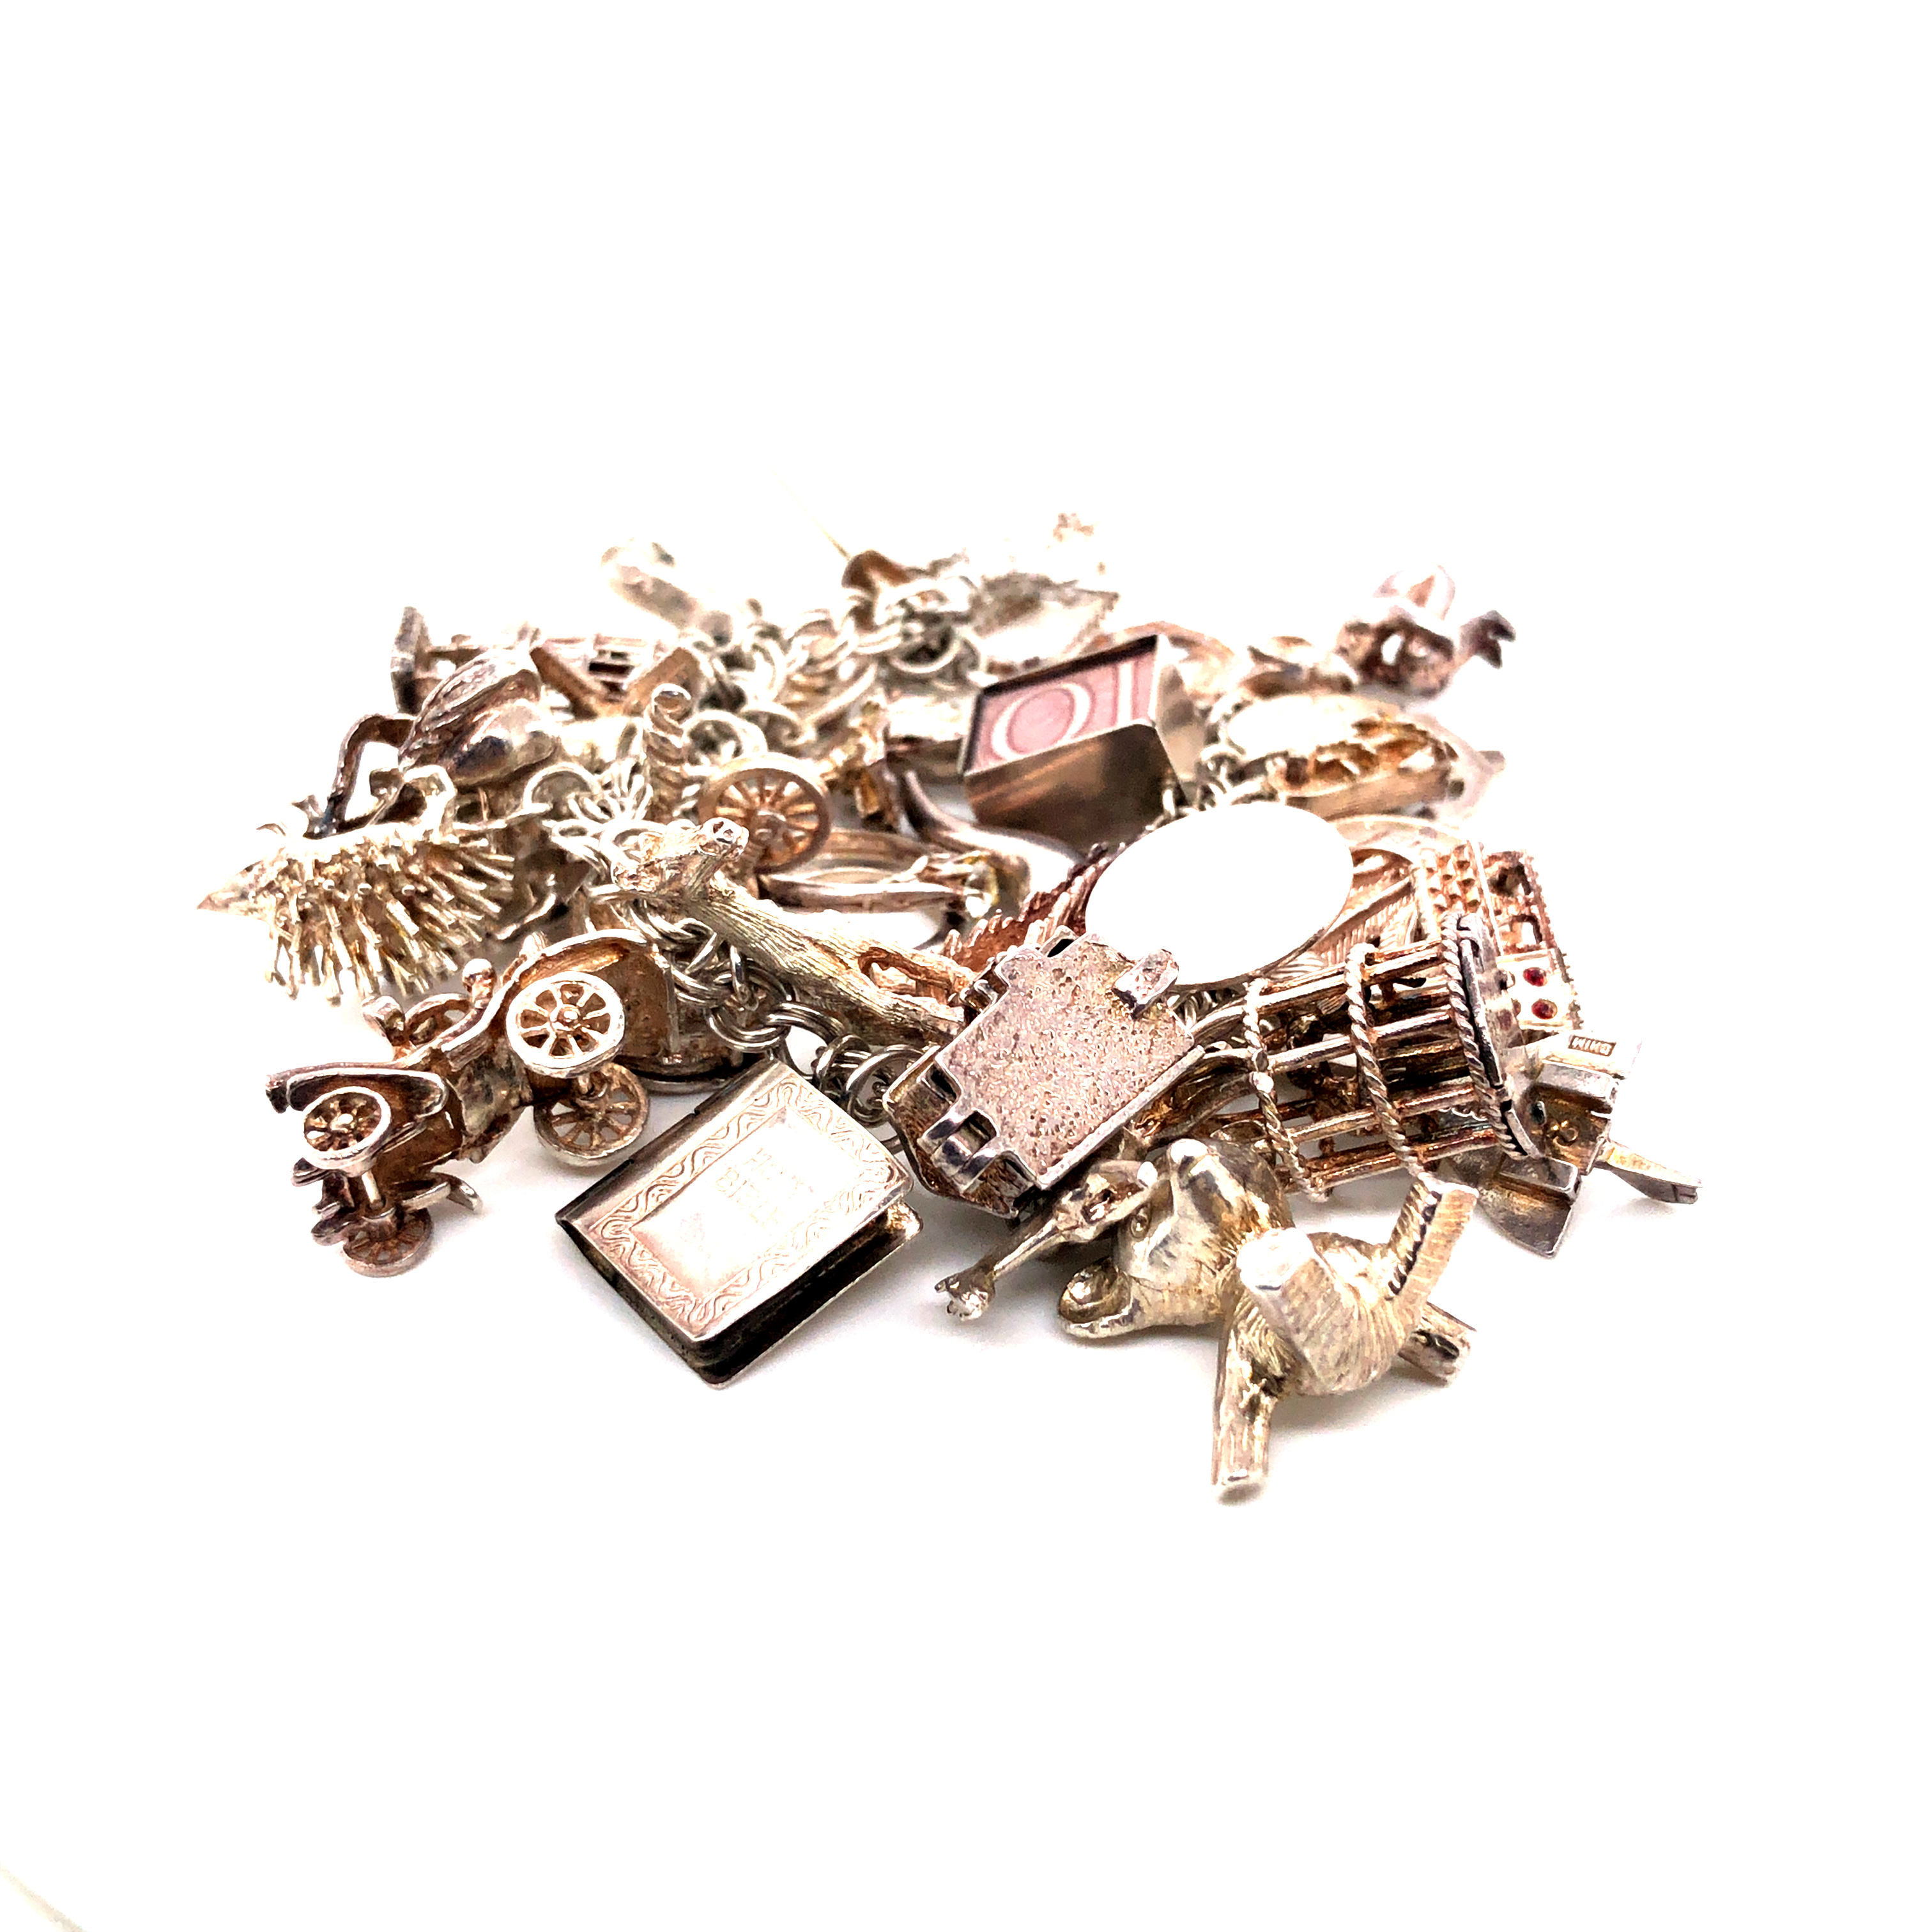 A SILVER CHARM BRACELET WITH VARIOUS SILVER AND WHITE METAL CHARMS TO INCLUDE A 10 SHILLING NOTE - Image 3 of 5